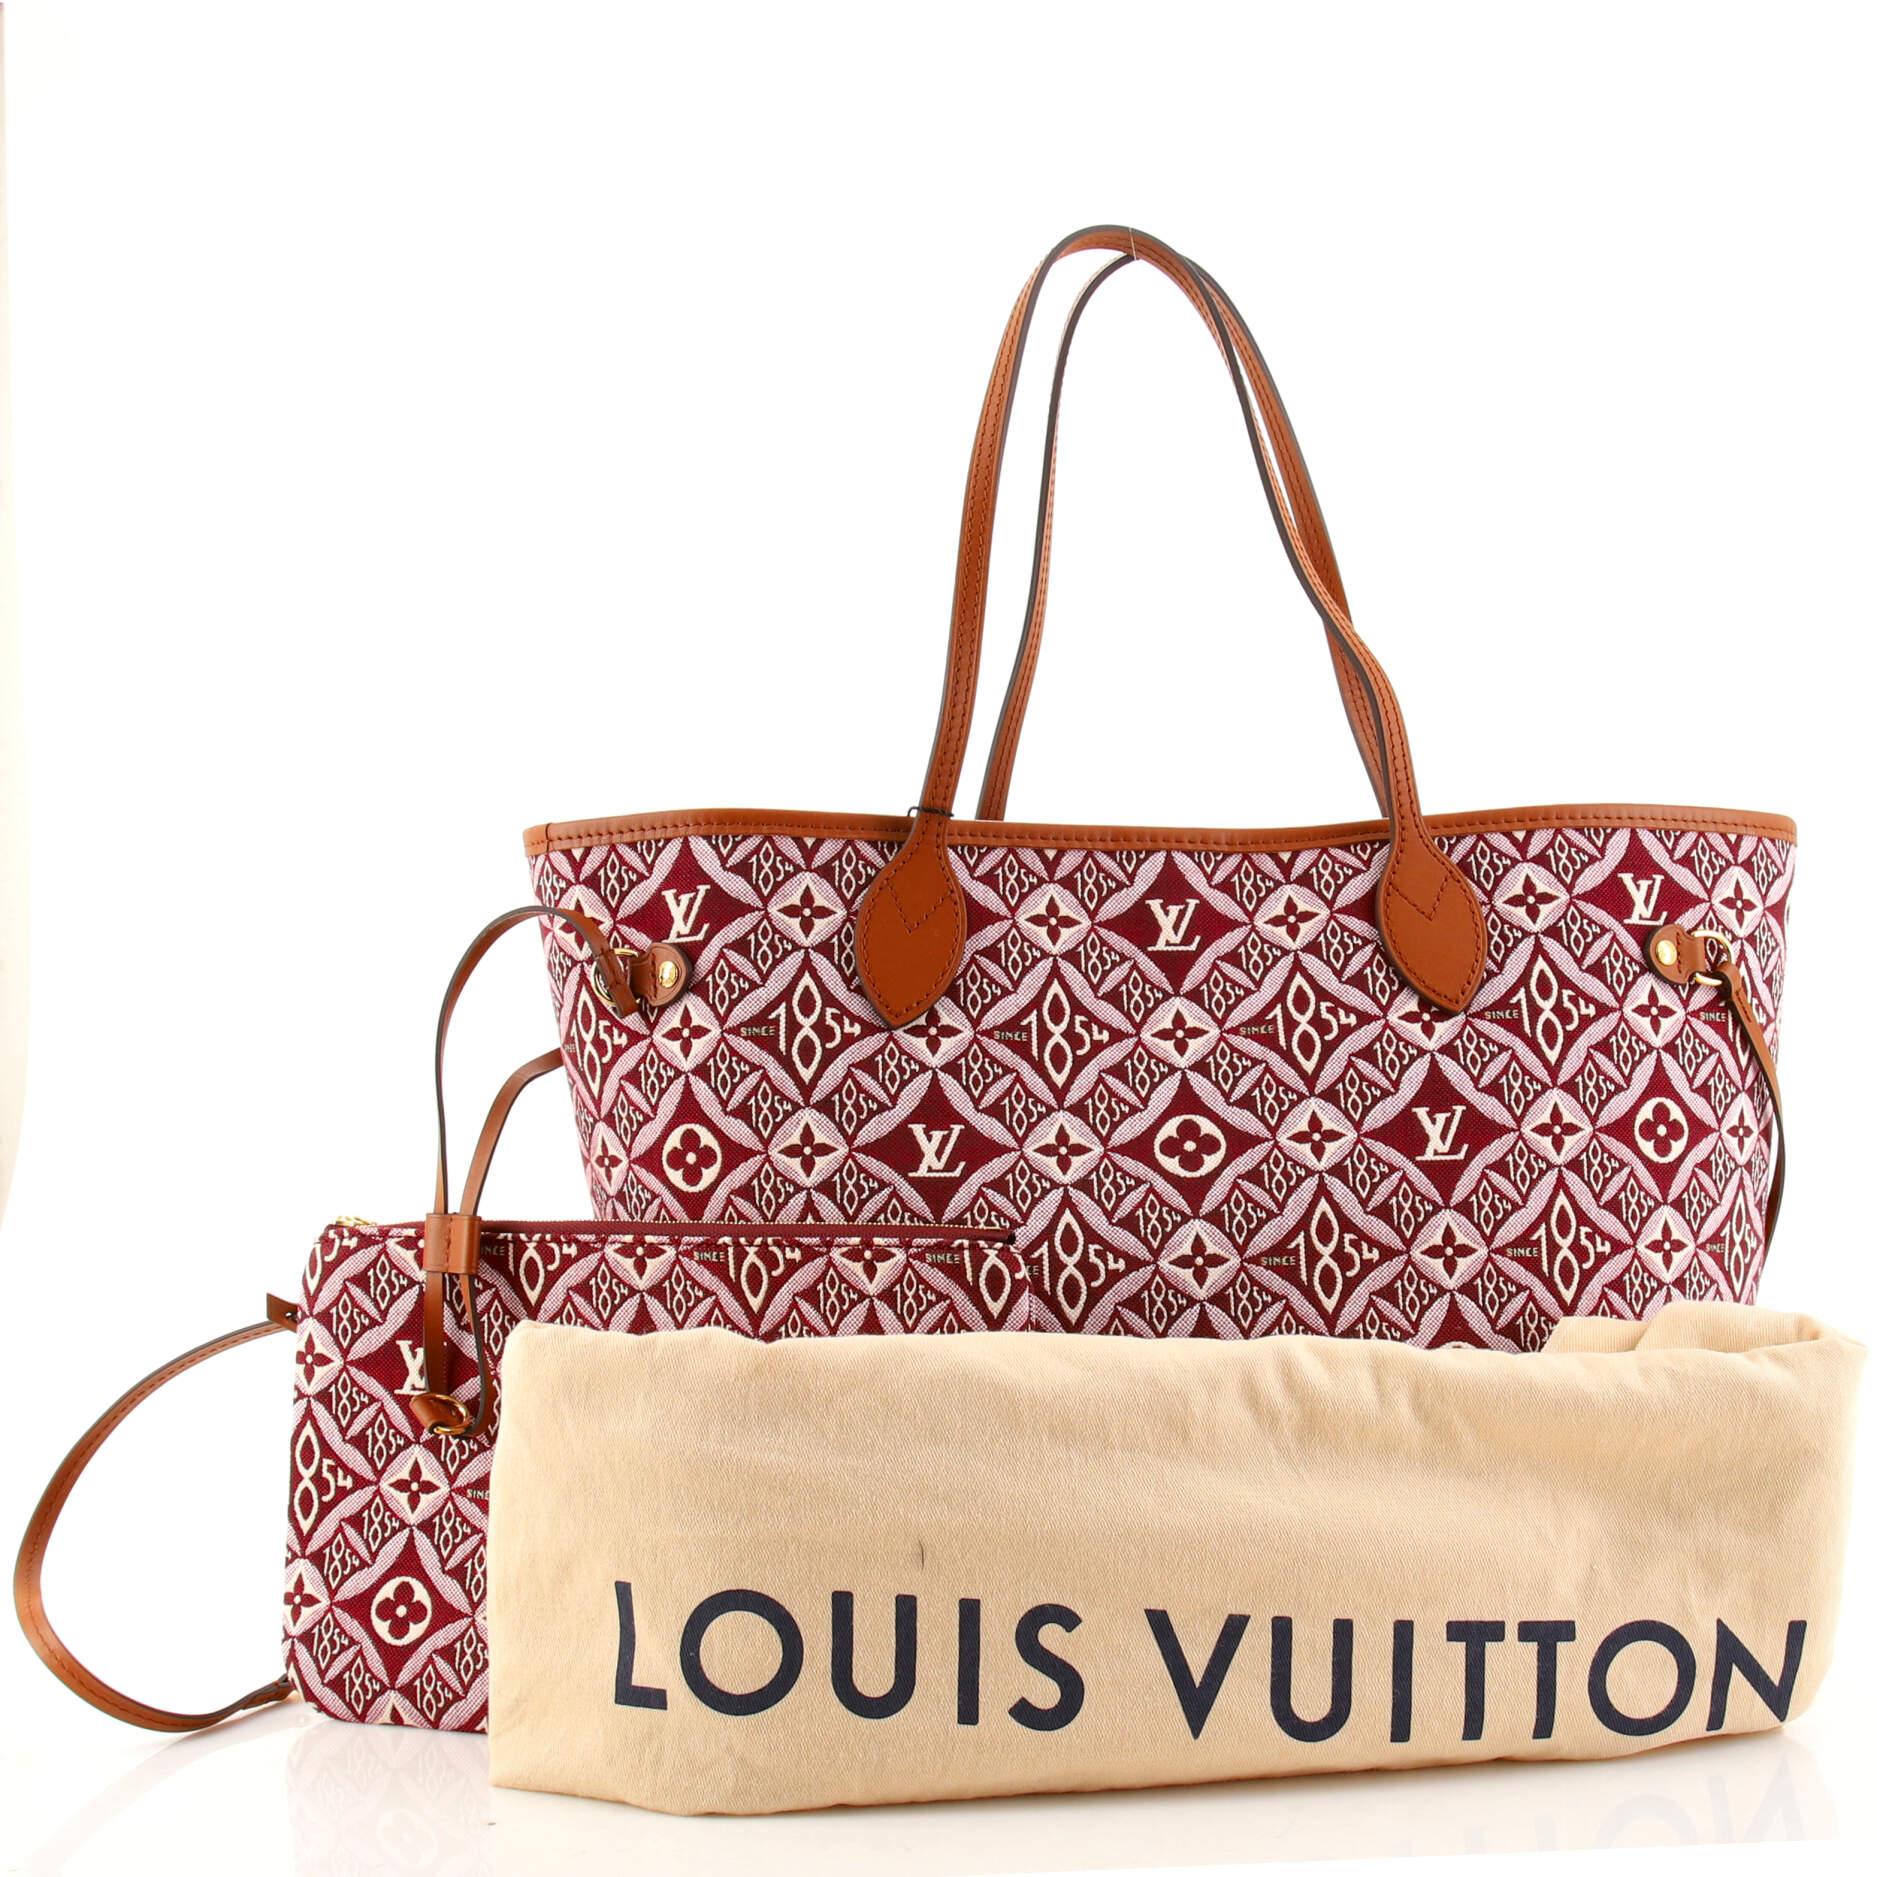 Louis Vuitton Since 1854 - 11 For Sale on 1stDibs  louis vuitton 1854 bag,  louis vuitton 1854 collection blue, 1854 lv bag